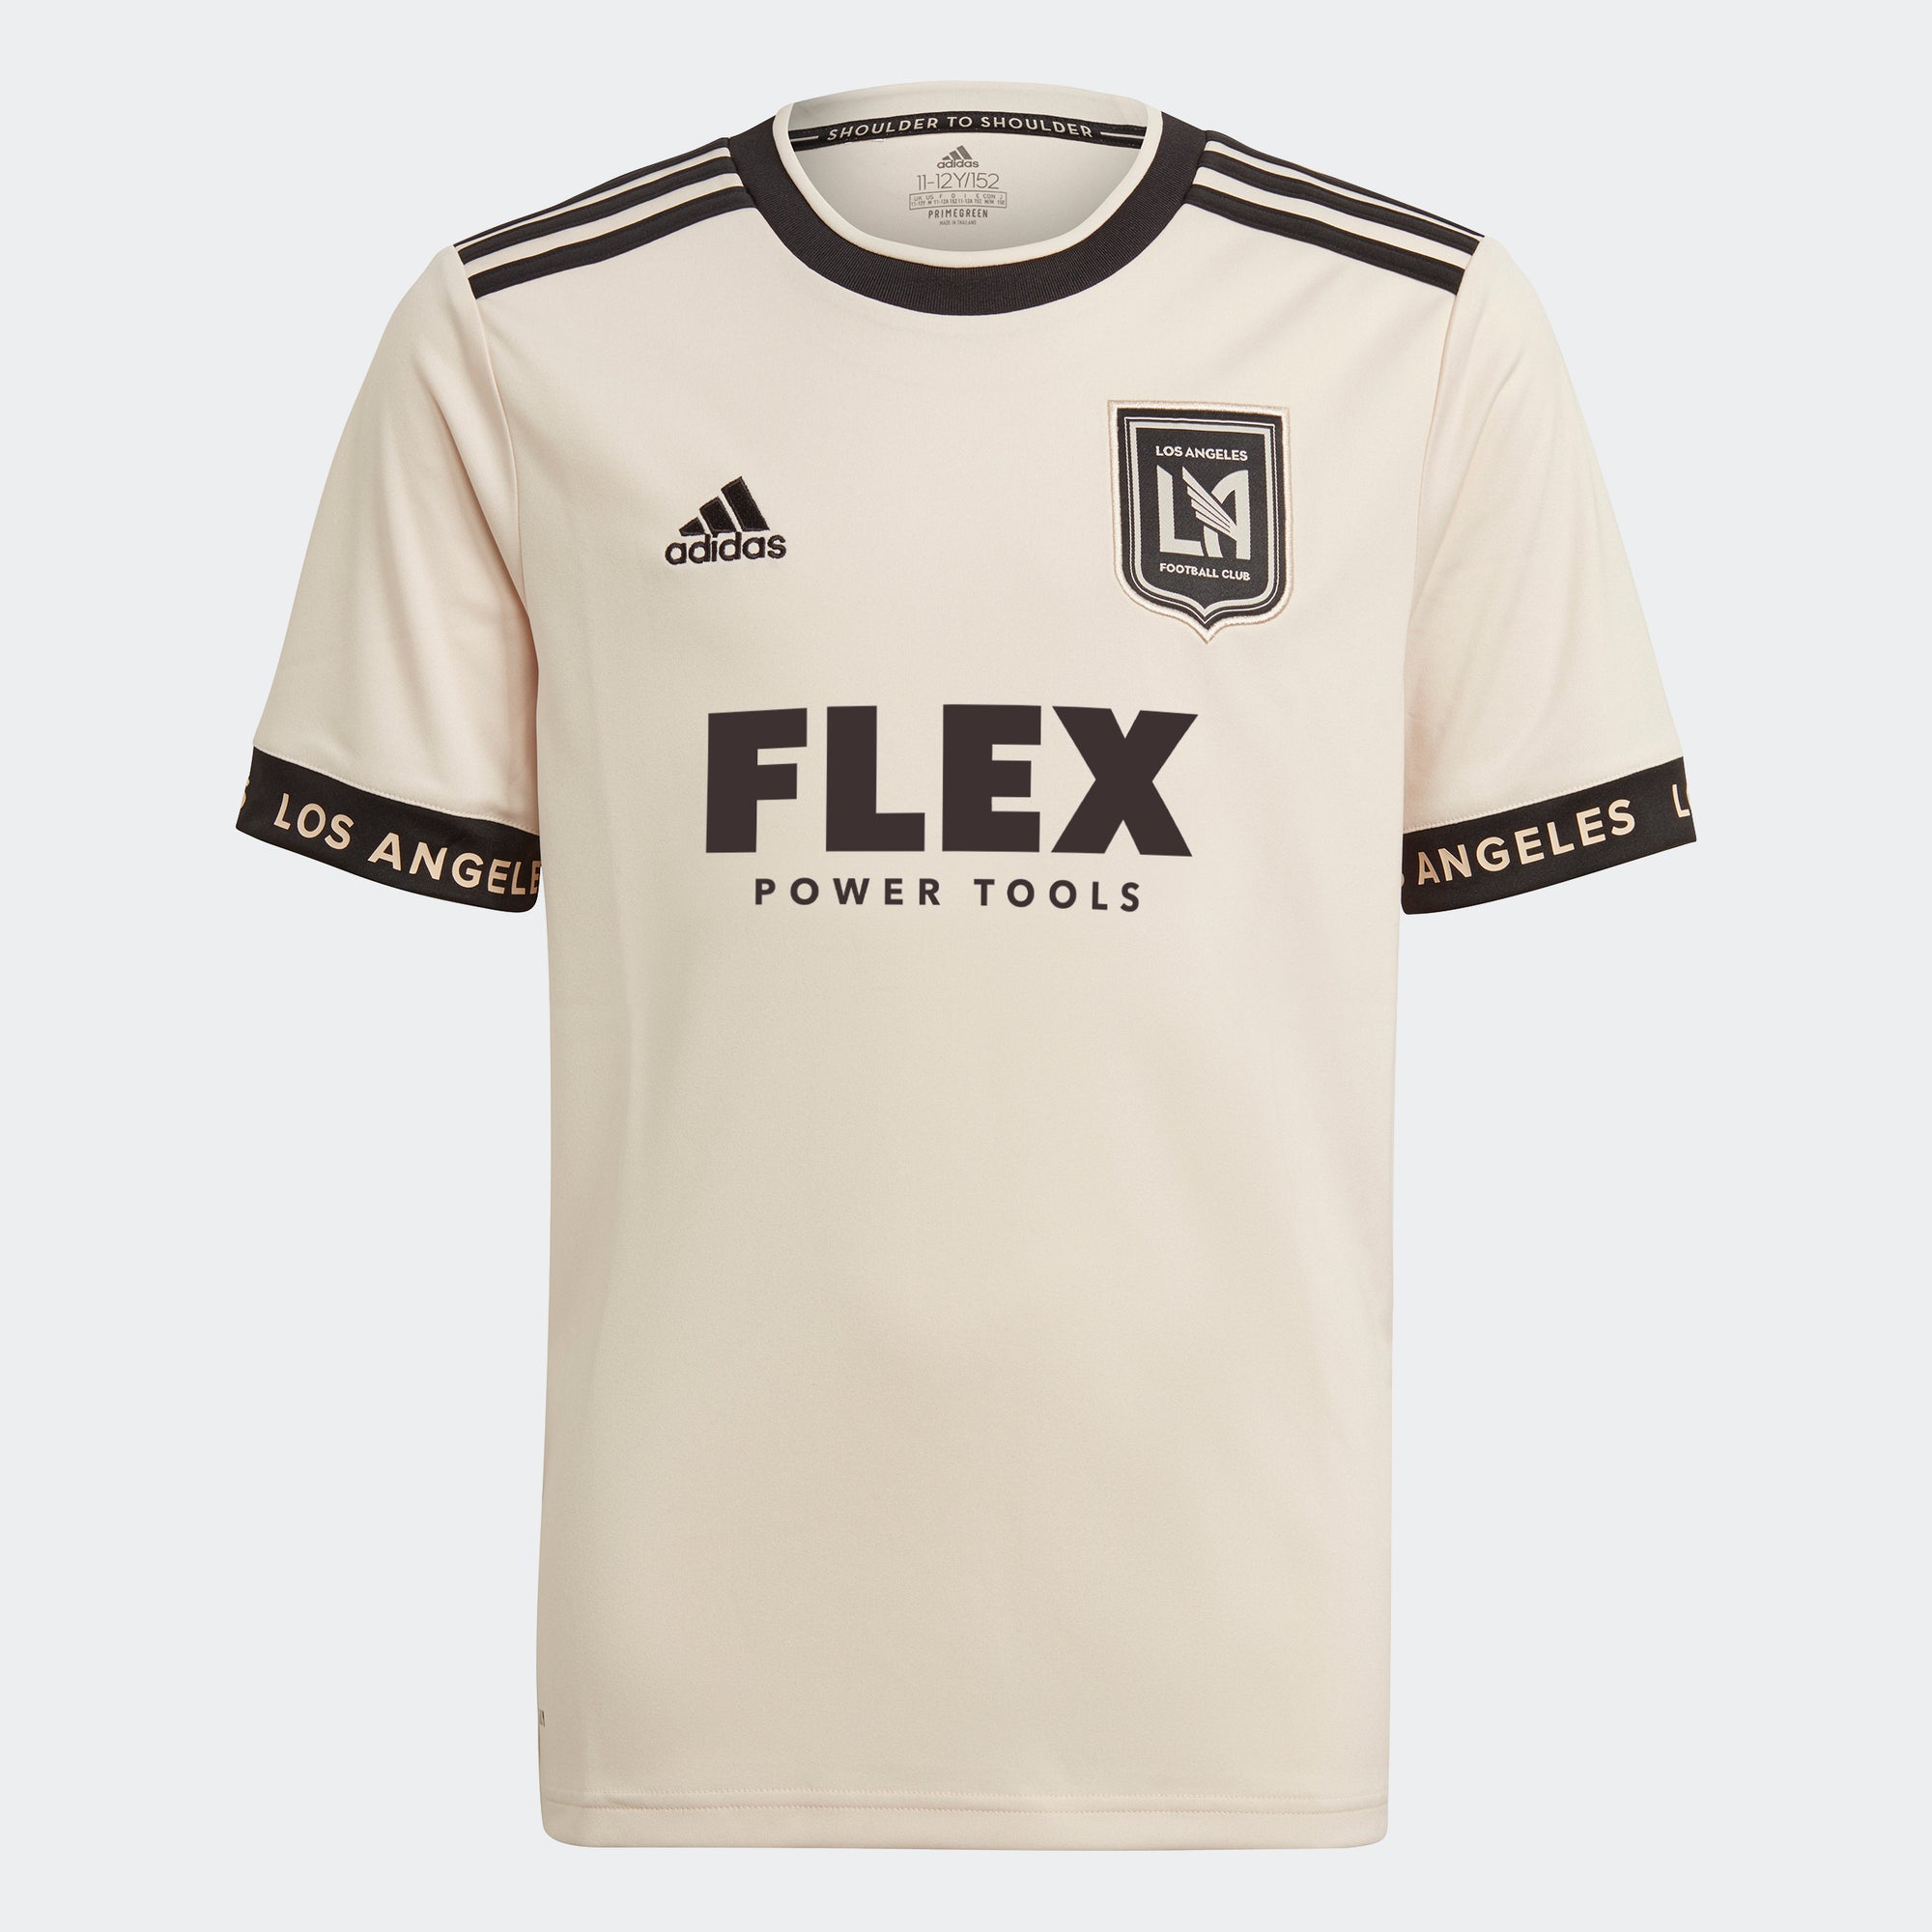 adidas LAFC Warm Up Top 21/22 Pink, Niky's Sports